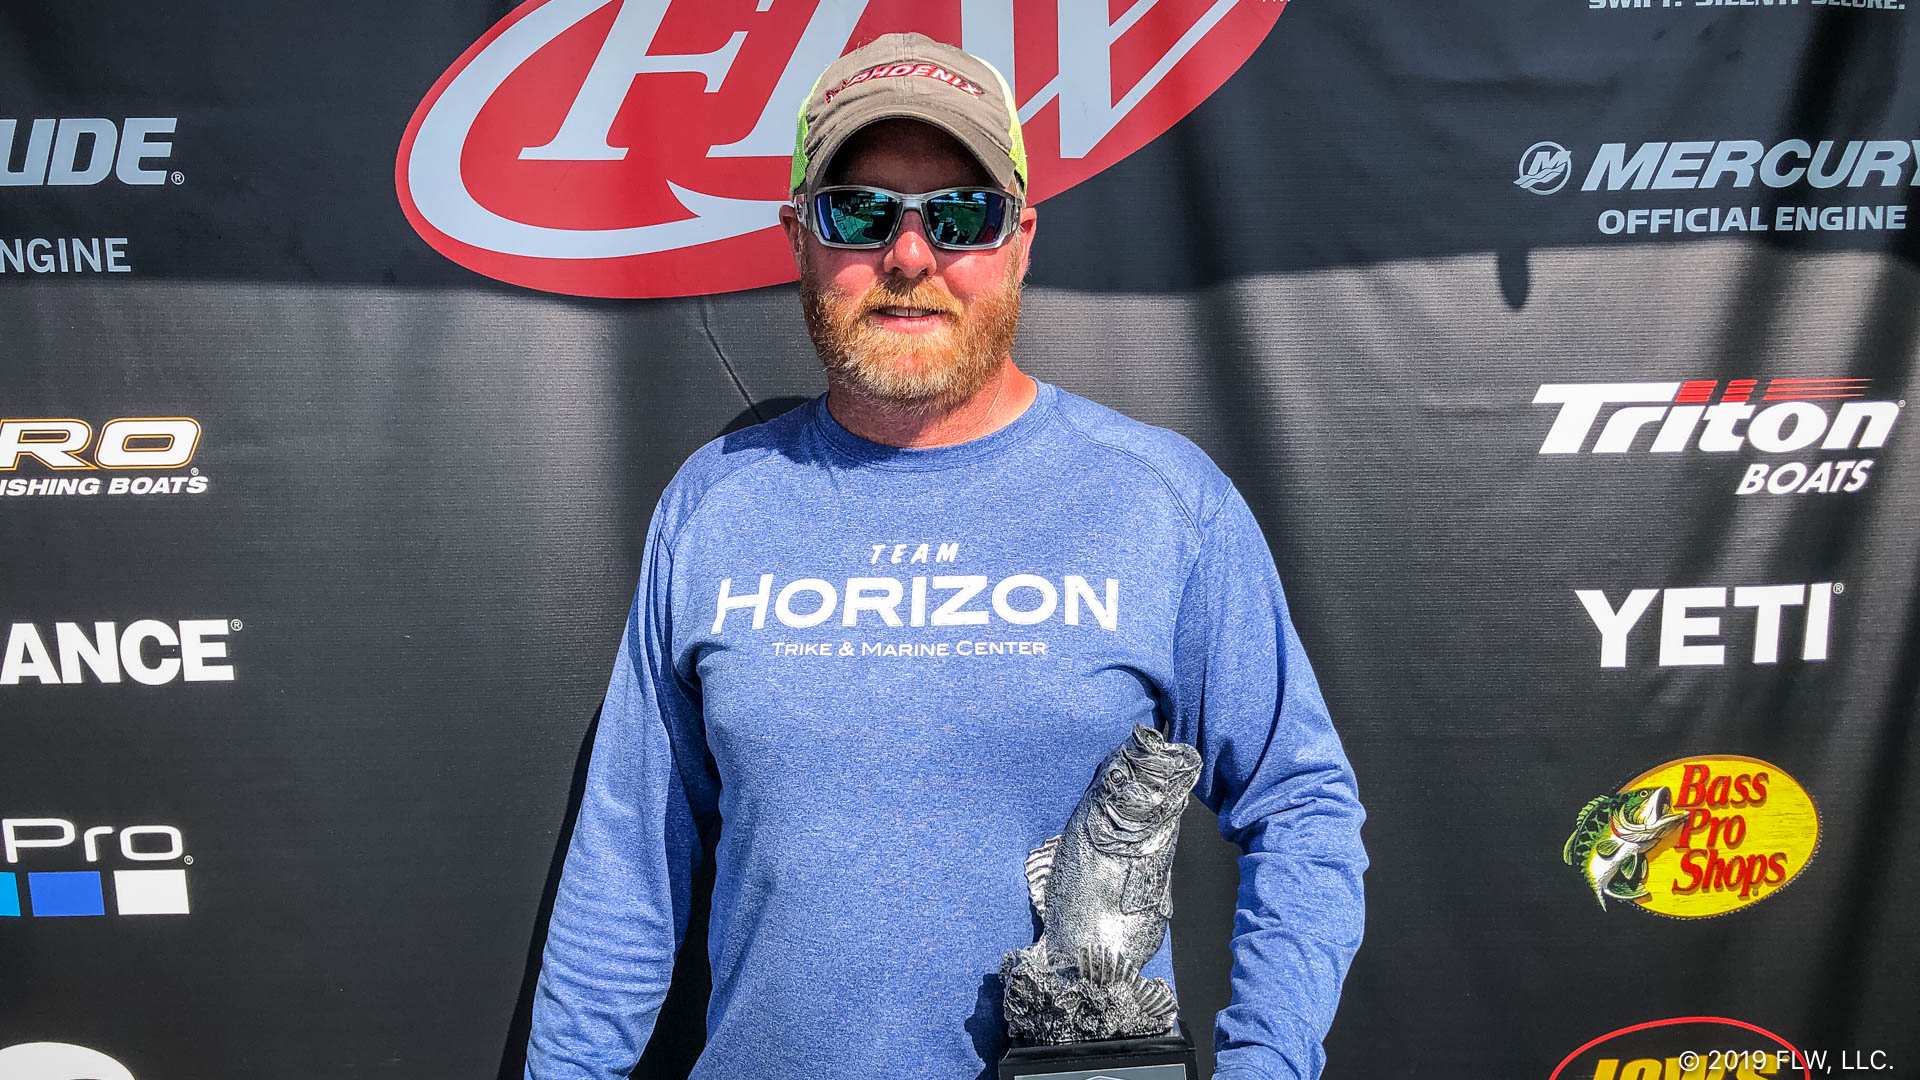 Clarksville's Williams Wins T-H Marine FLW Bass Fishing League Tournament  on Lake Dardanelle Presented by Navionics - Major League Fishing